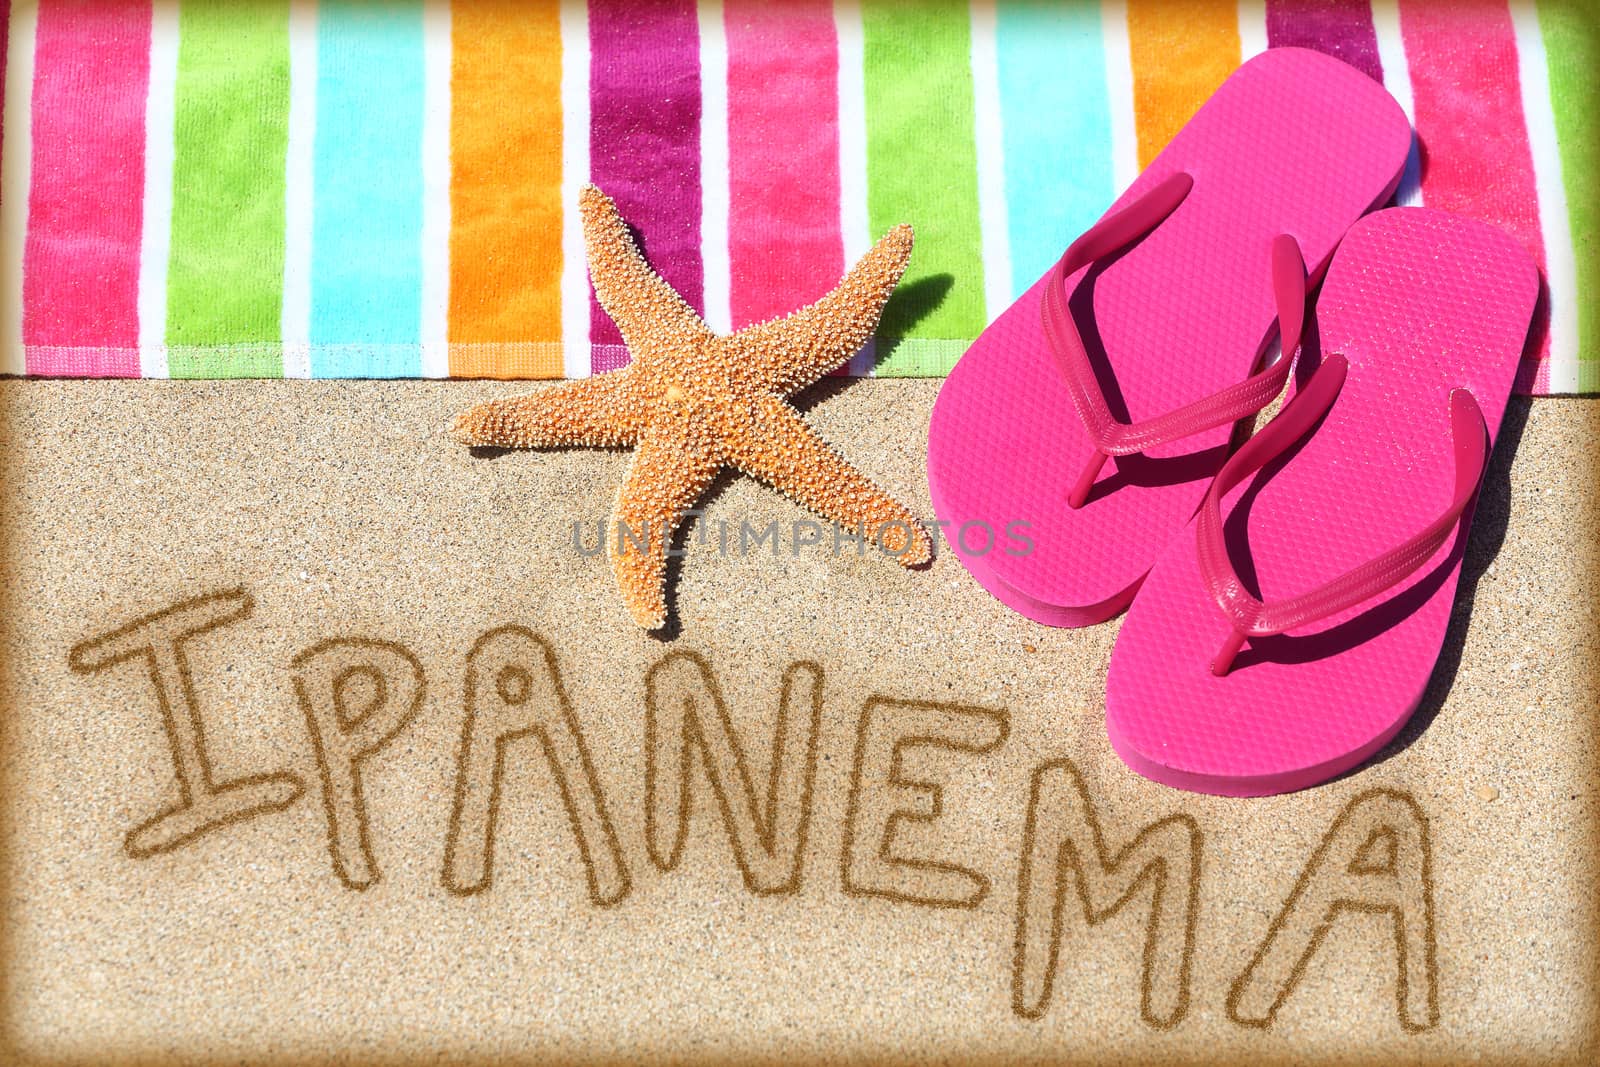 Ipanema beach concept. Overhead view ot the word RIO written on golden sand with a starfish, pink flip flops and towel conceptual of a summer vacation and travel in Rio de Janiero, Brazil